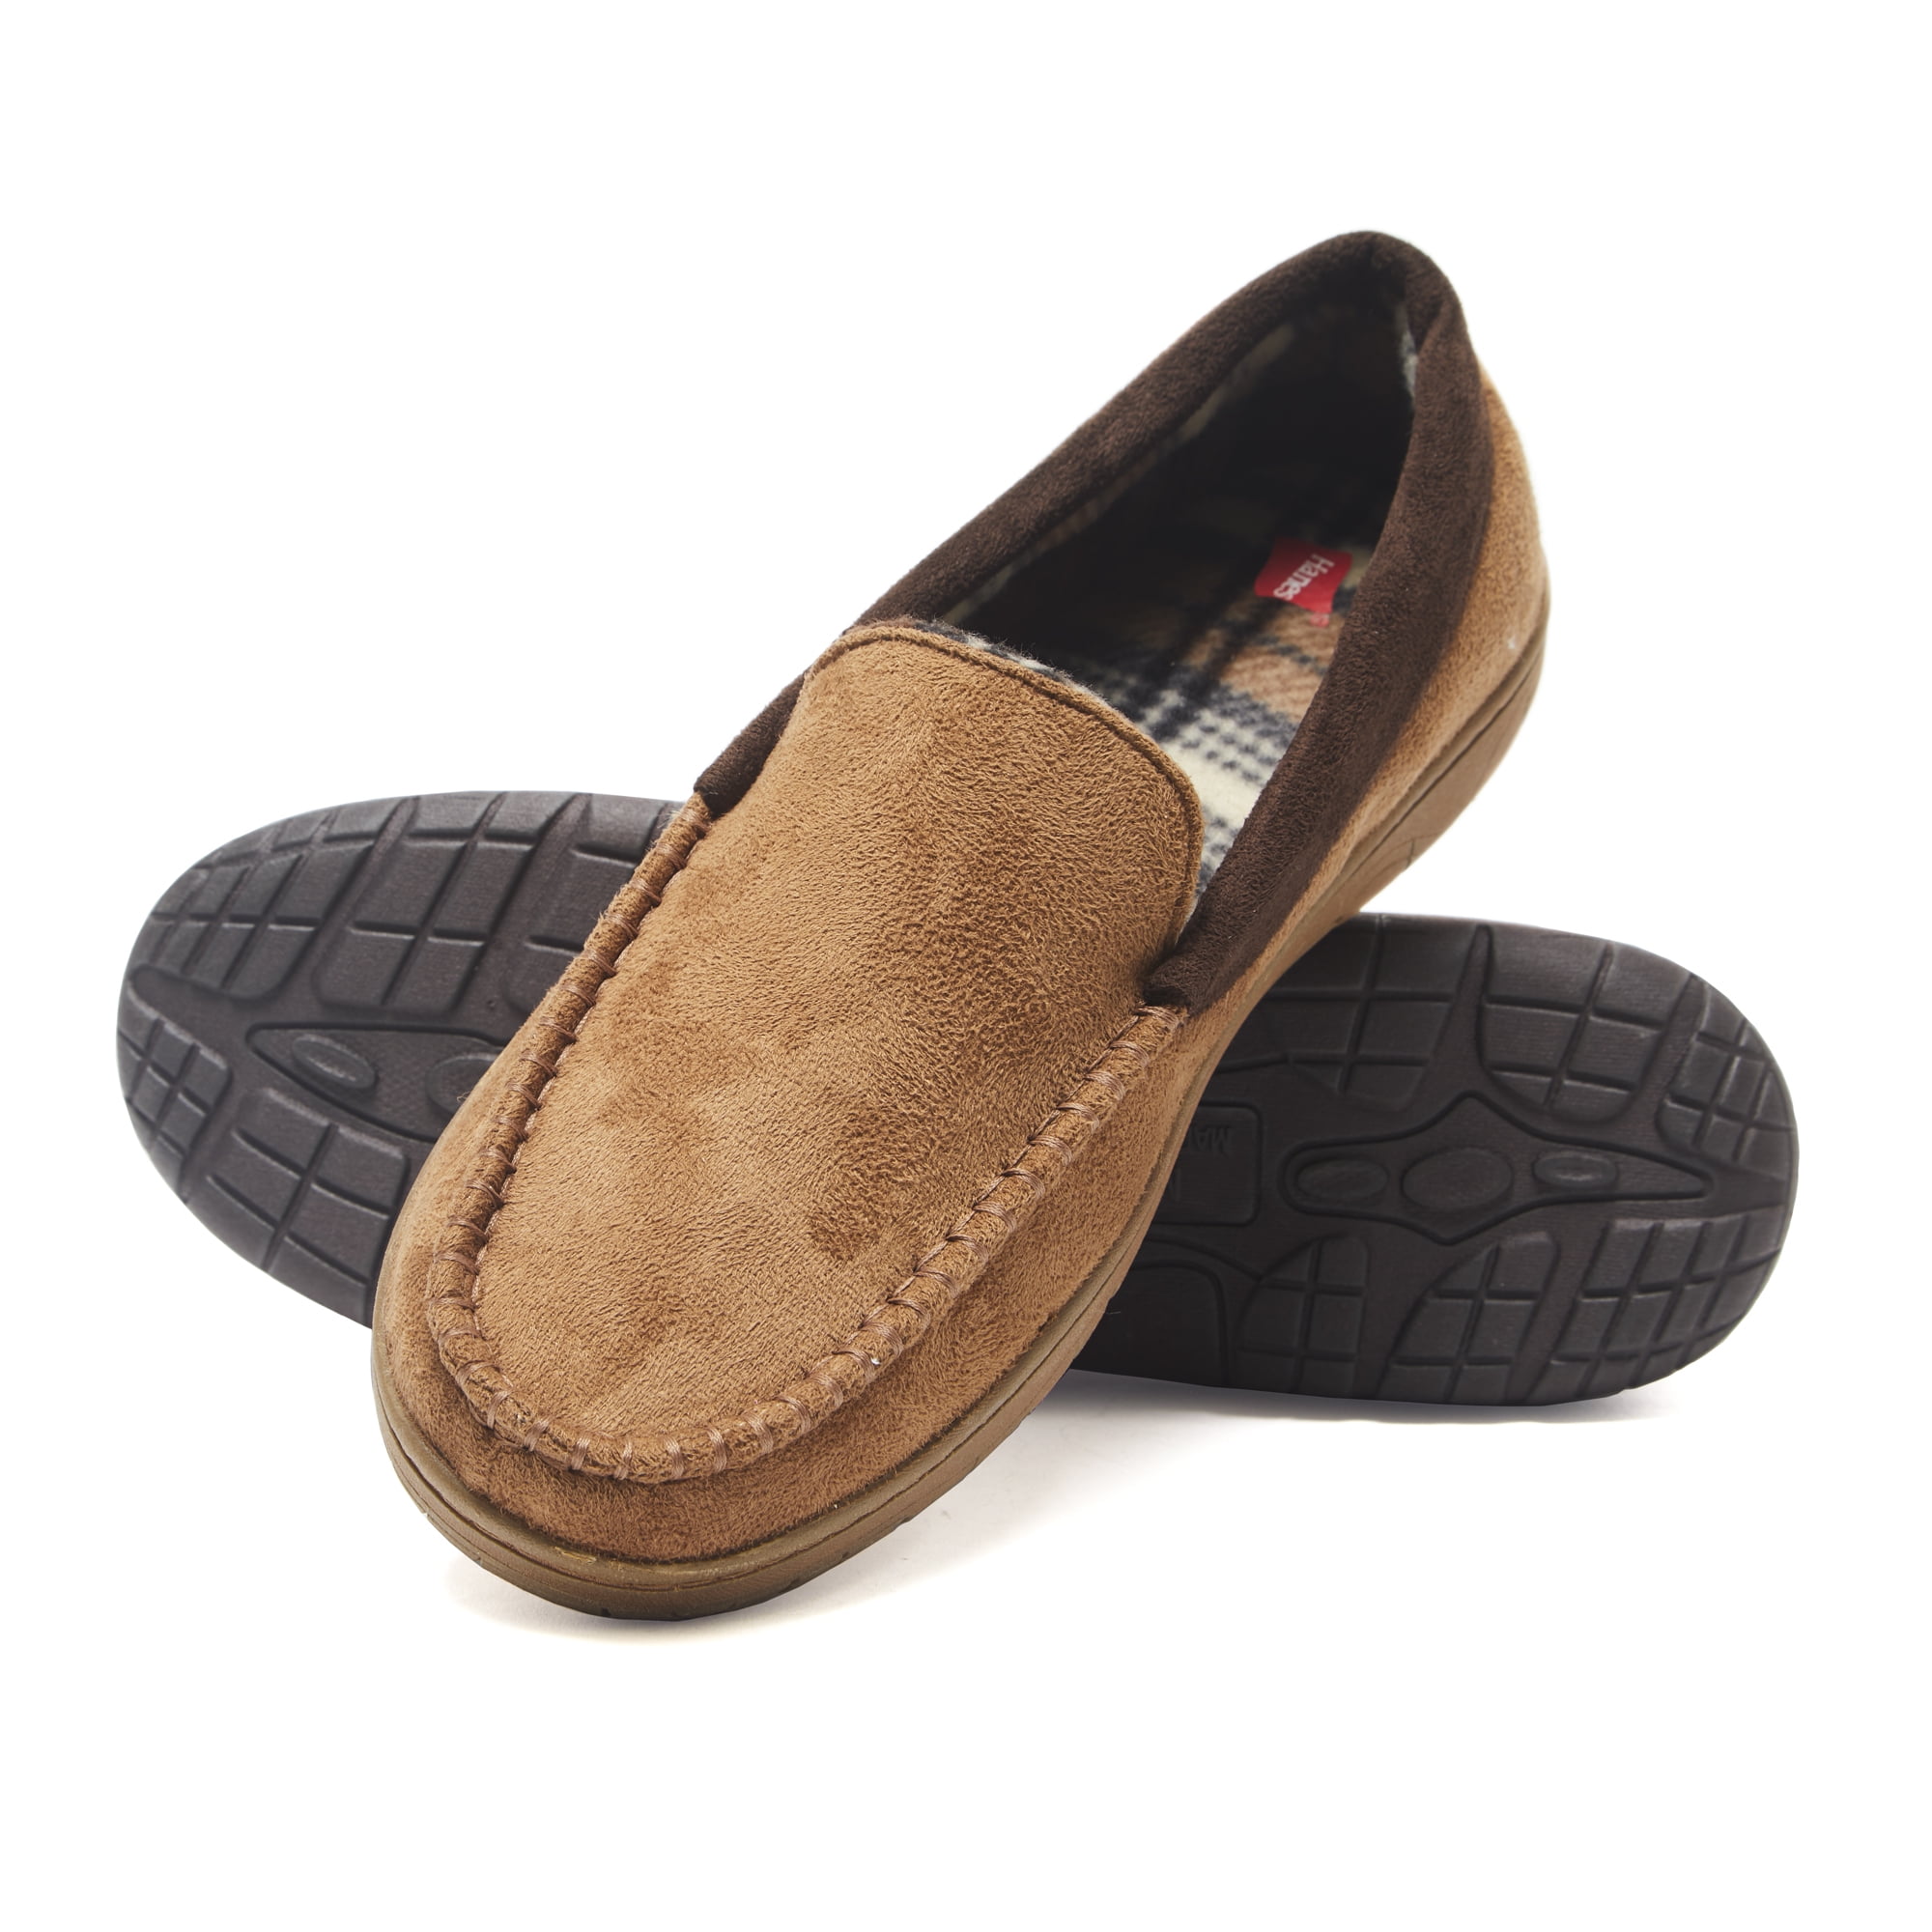 Mens Moccasin Slippers for Men House Indoor Shoes with Red Plaid and Anti Slip Rubber Sole 